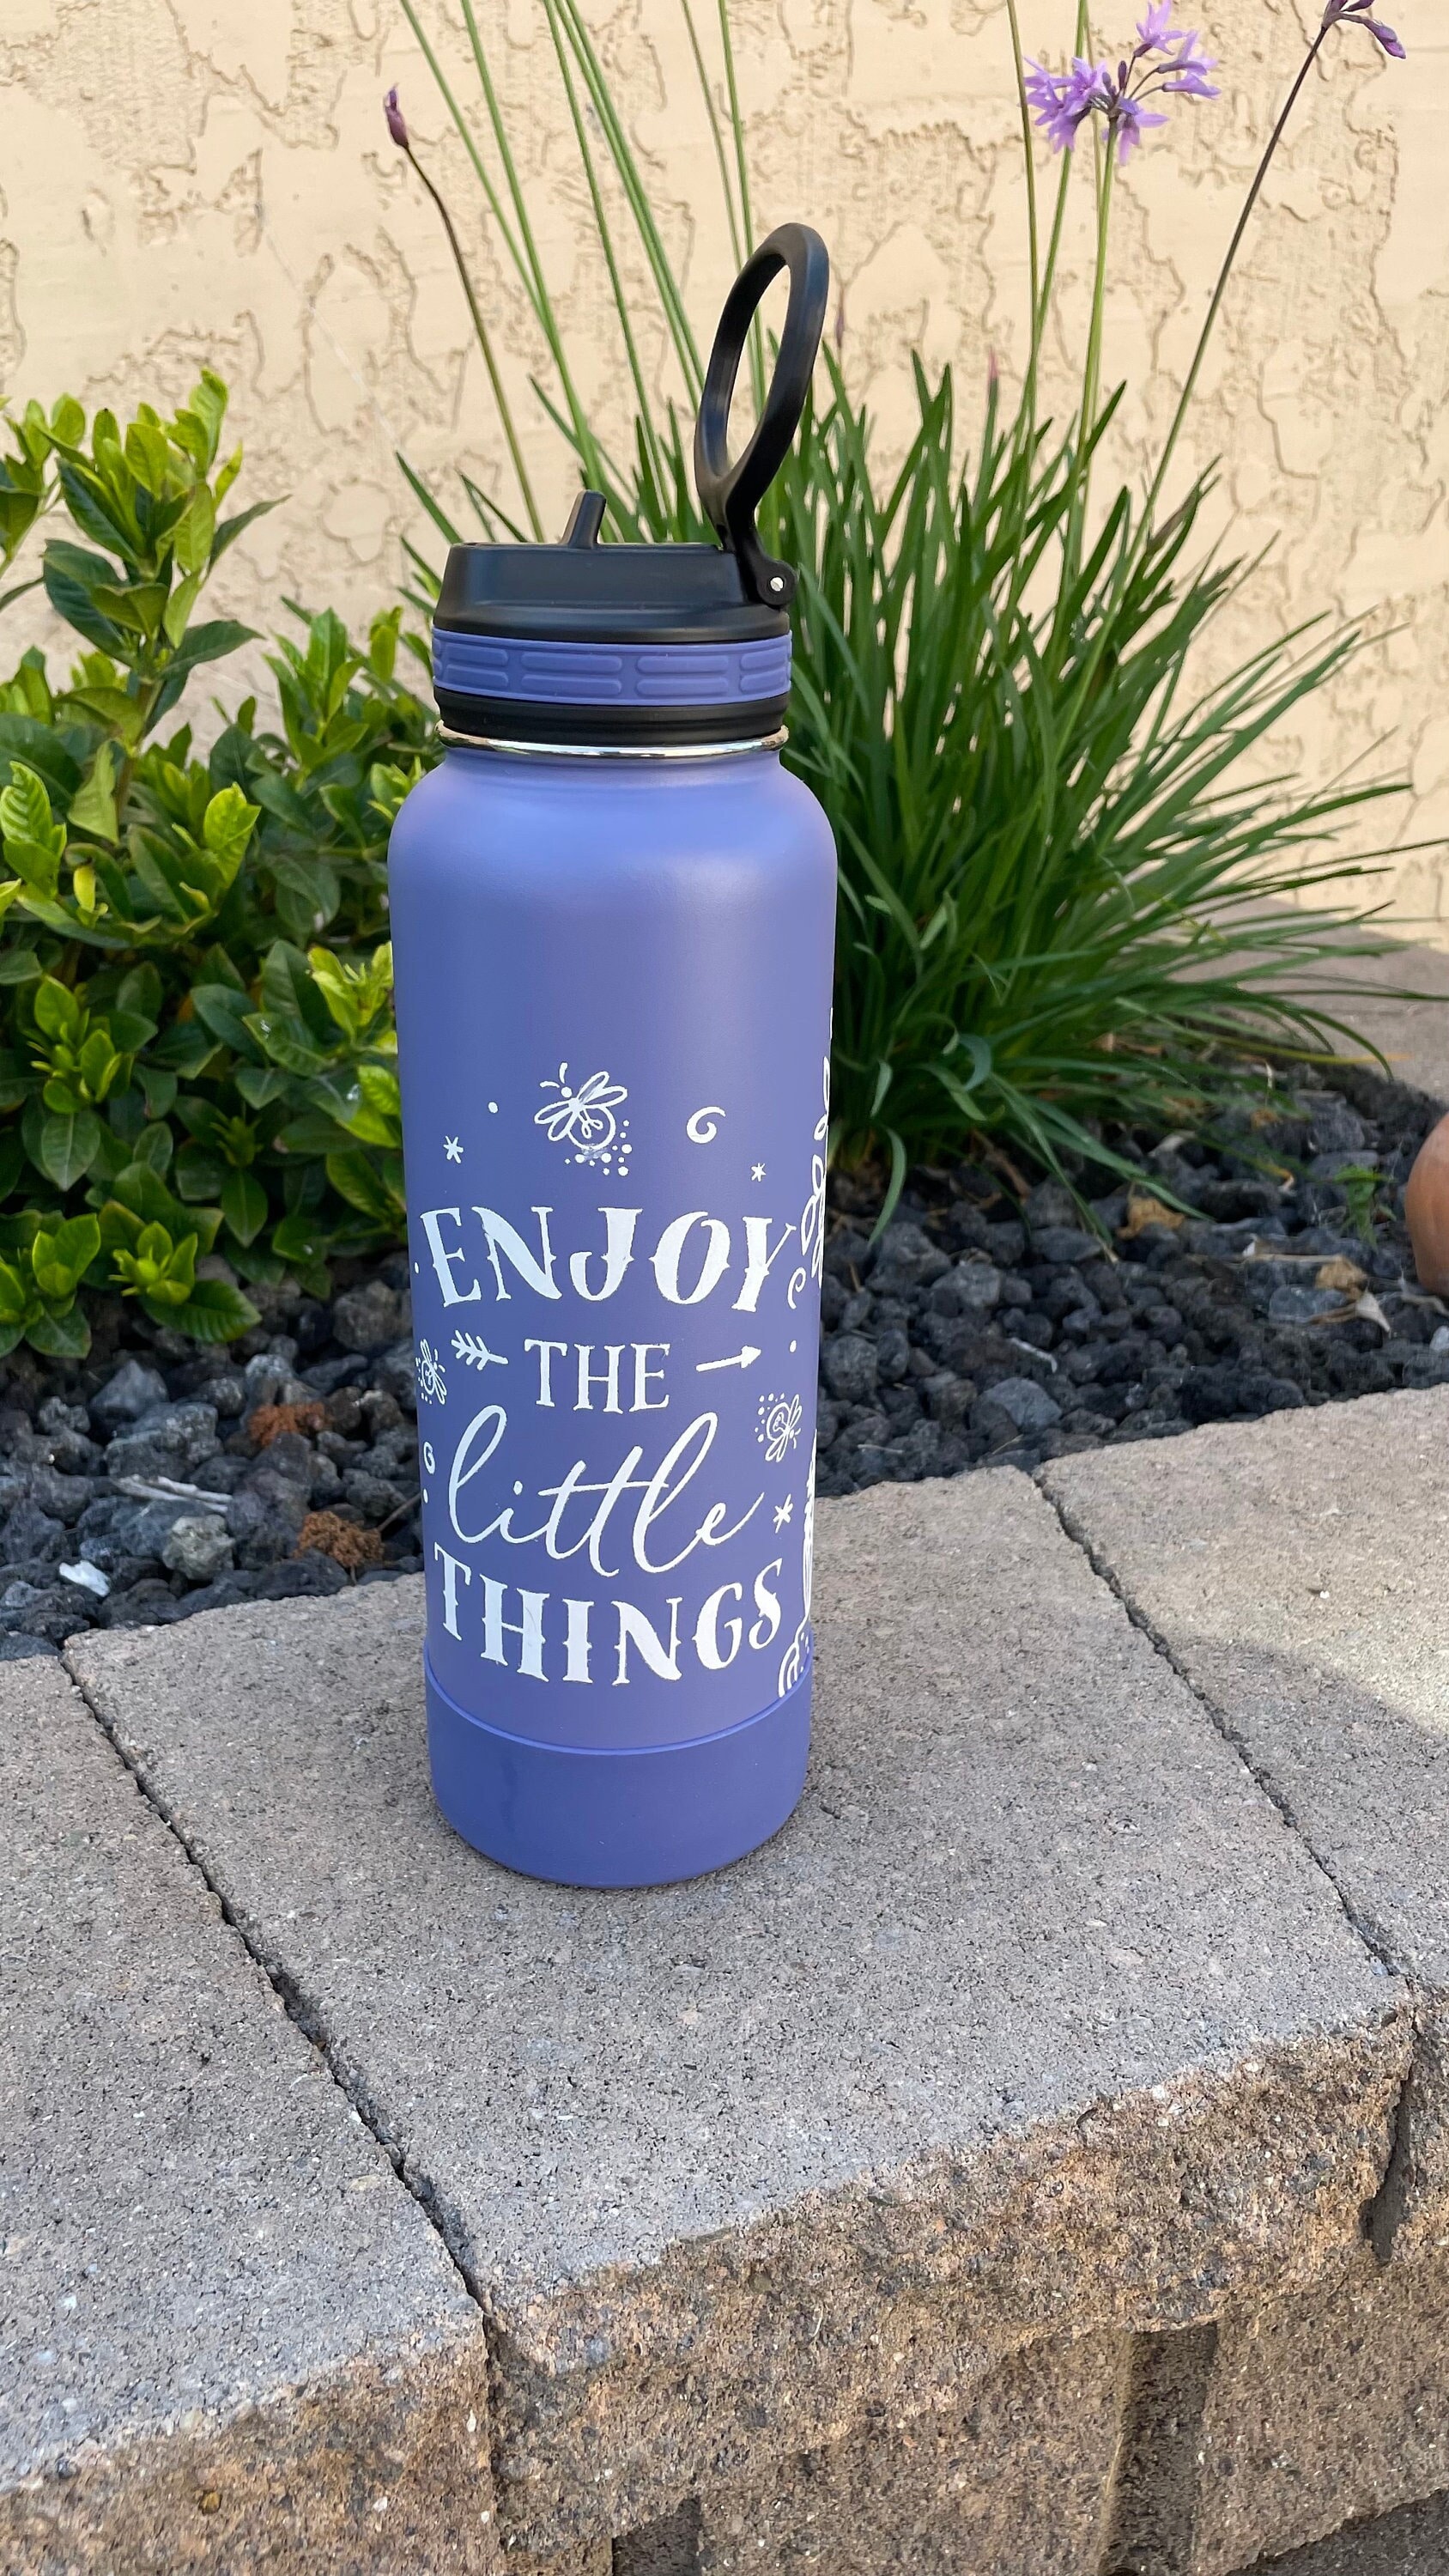 24 Oz. Personalized Thermoflask Water Bottle, Laser Engraved Thermoflask,  Cup for Camping / Hiking / Sports, Custom Team Gift 